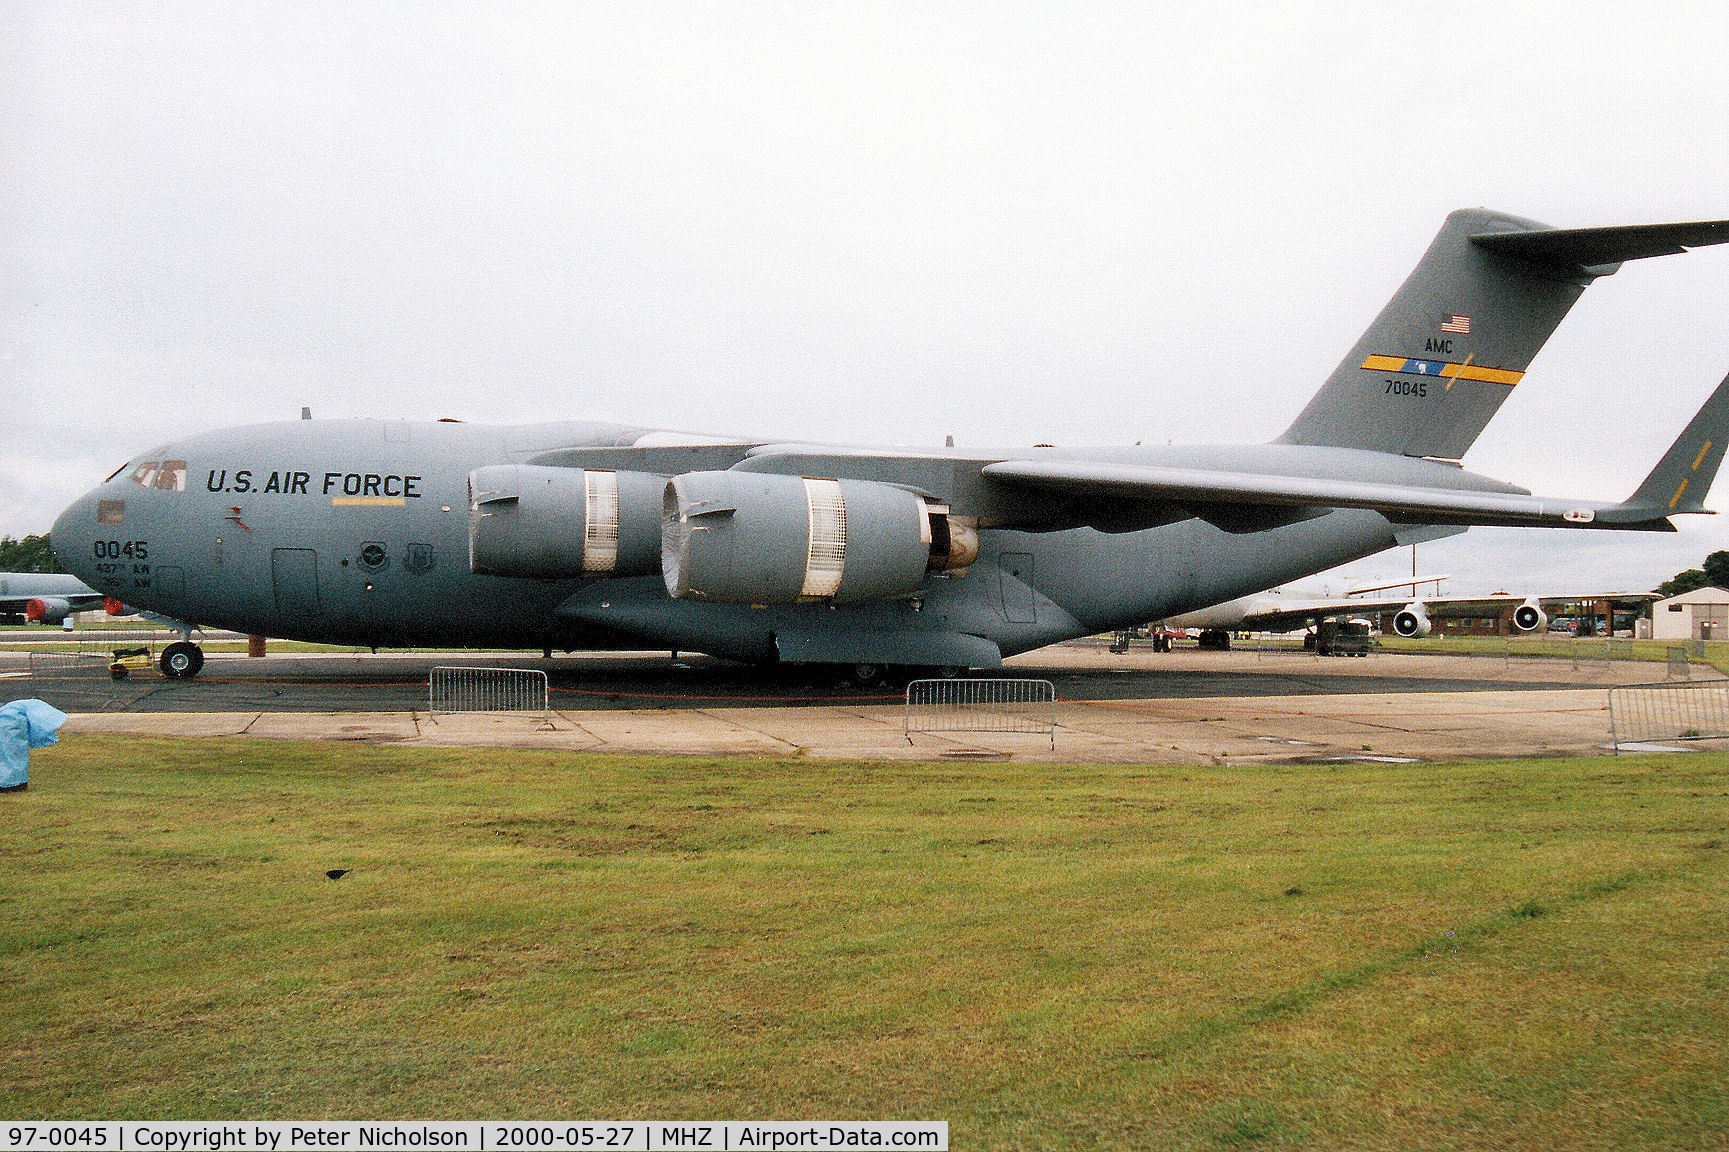 97-0045, 1997 Boeing C-17A Globemaster III C/N P-45, Another view of the C-17A Globemaster from Charleston AFB's 437th Airlift Wing on display at the 2000 RAF Mildenhall Air Fete.